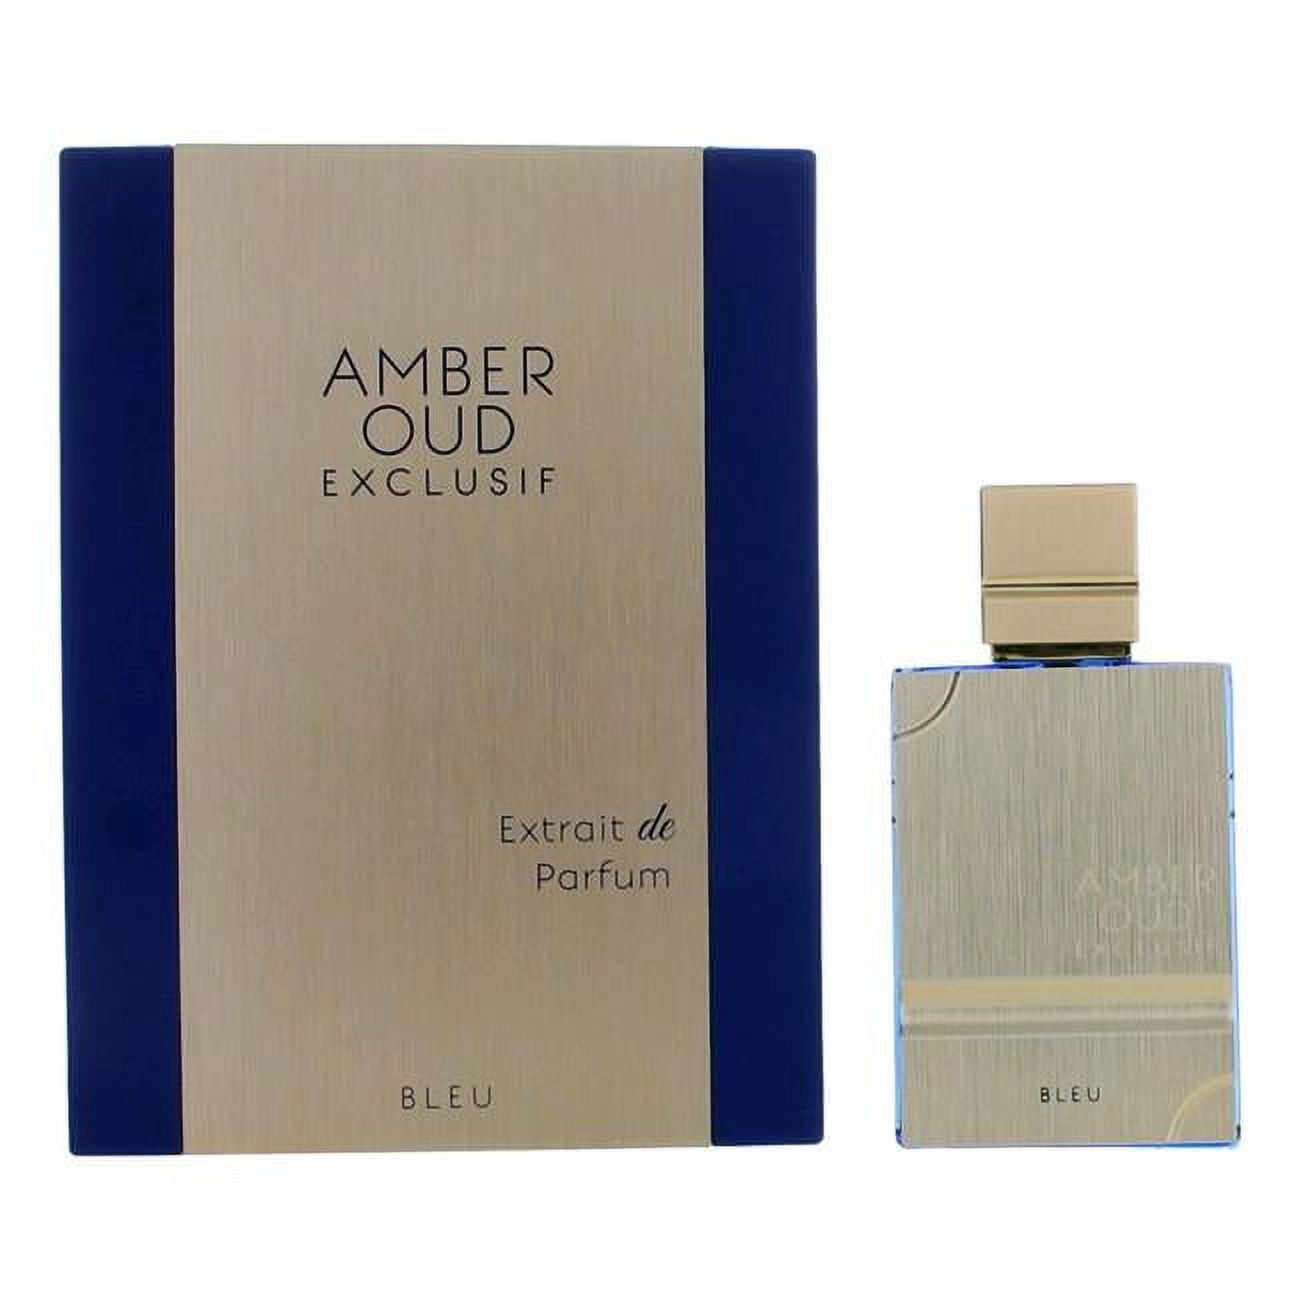 Haramain Amber Oud Blue Edition Fragrance Review 